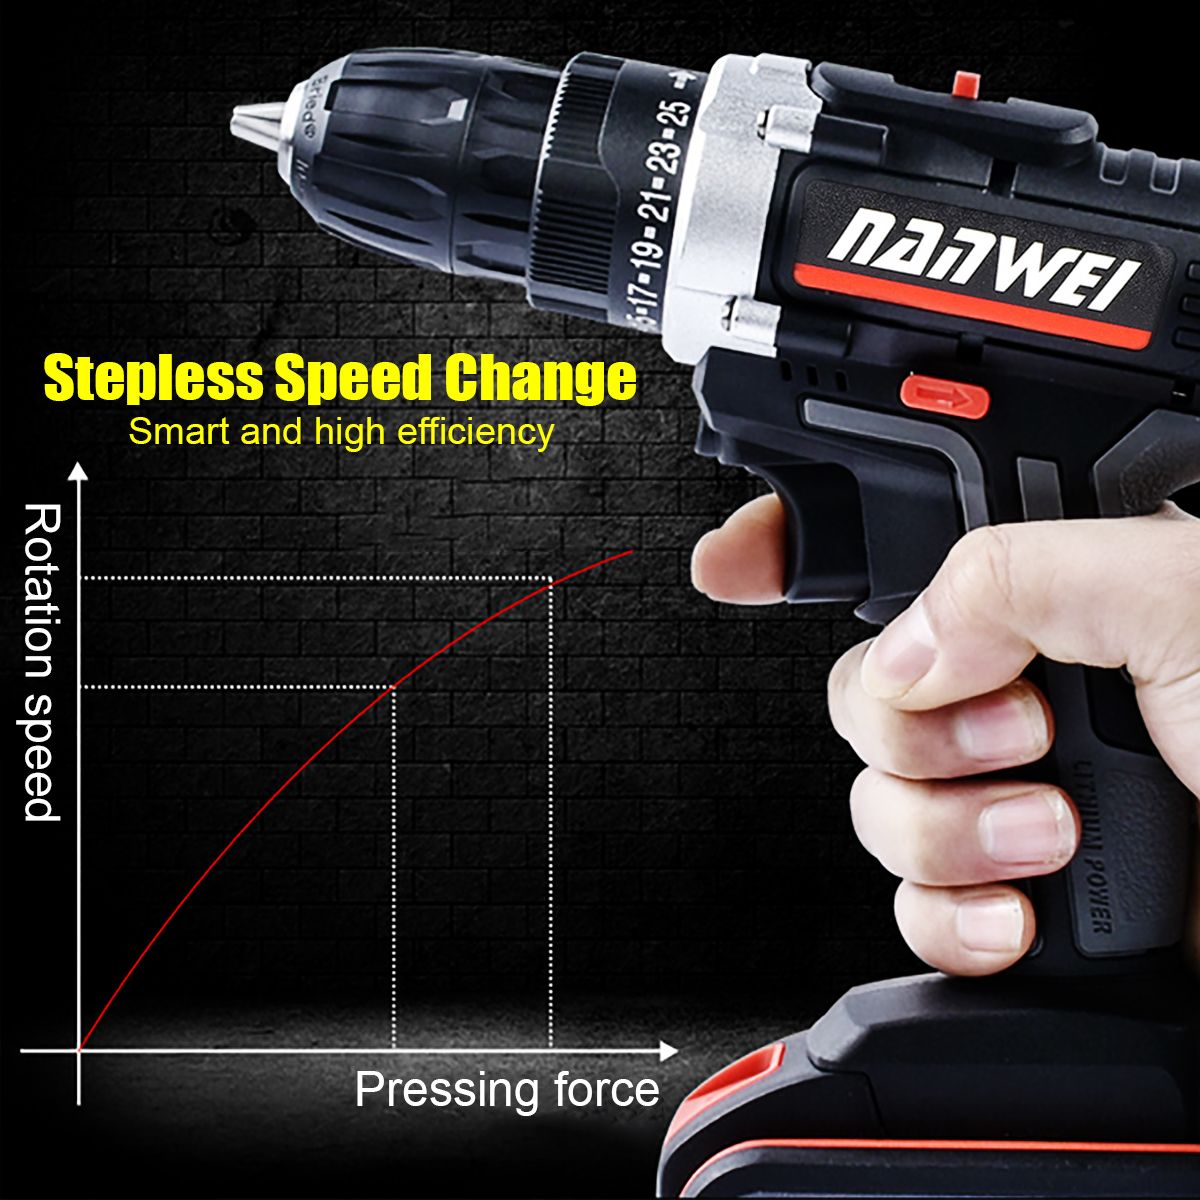 48VF-Electric-Cordless-Drill-Driver-Screwdriver-LED-Light-2-speed-Power-Drill-w-1-or-2-Battery-1471954